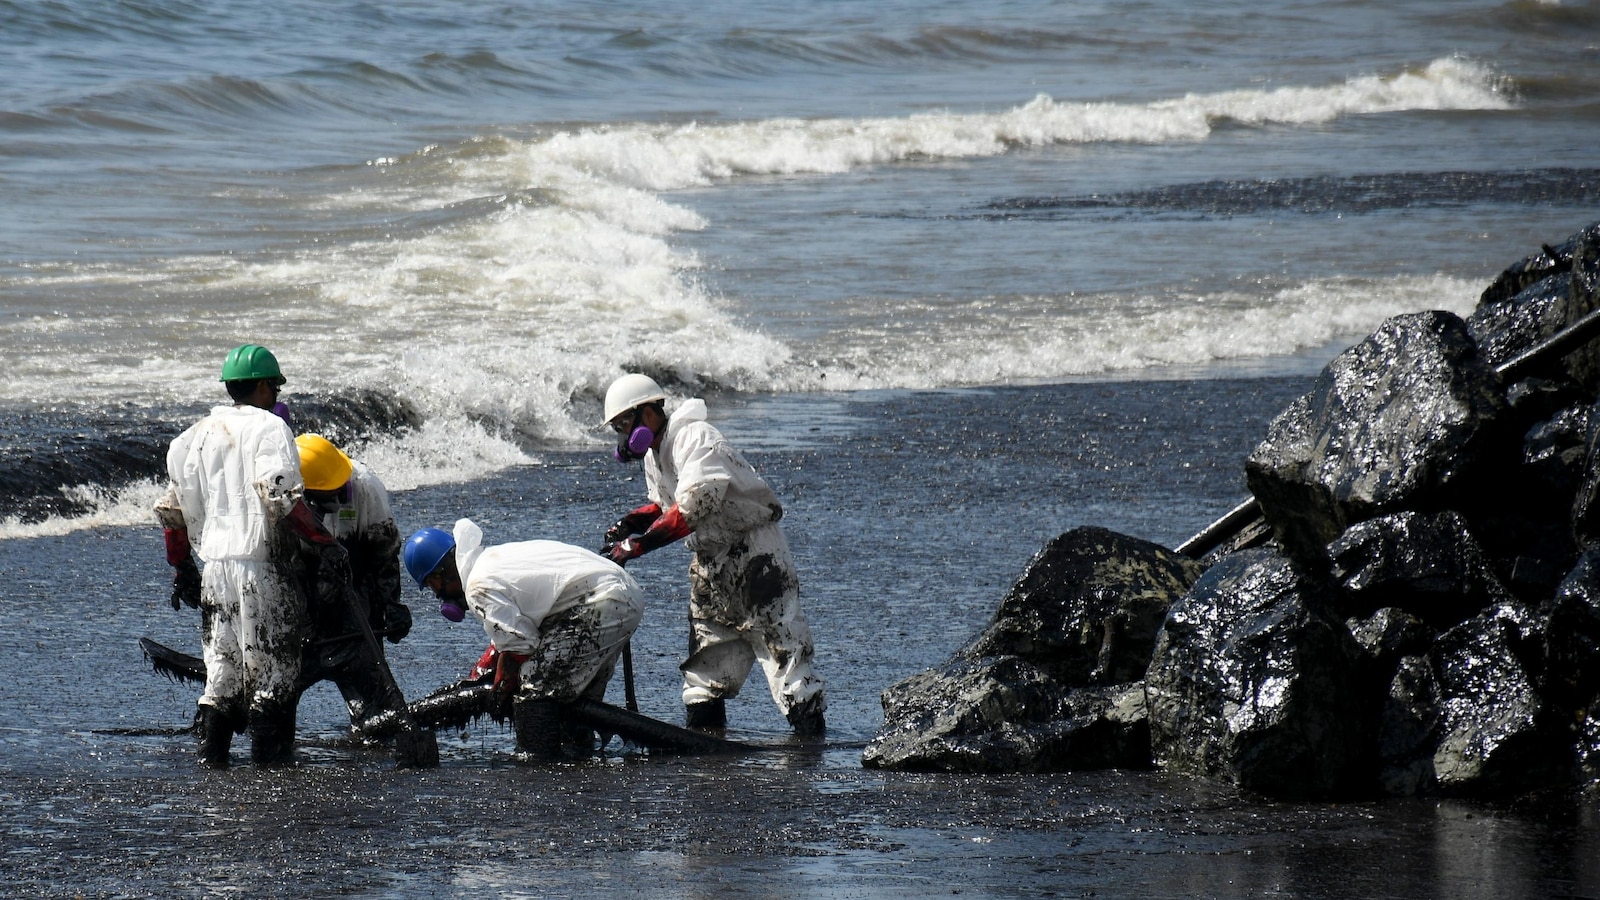 Trinidad and Tobago Prime Minister declares offshore oil spill as a 'national emergency'